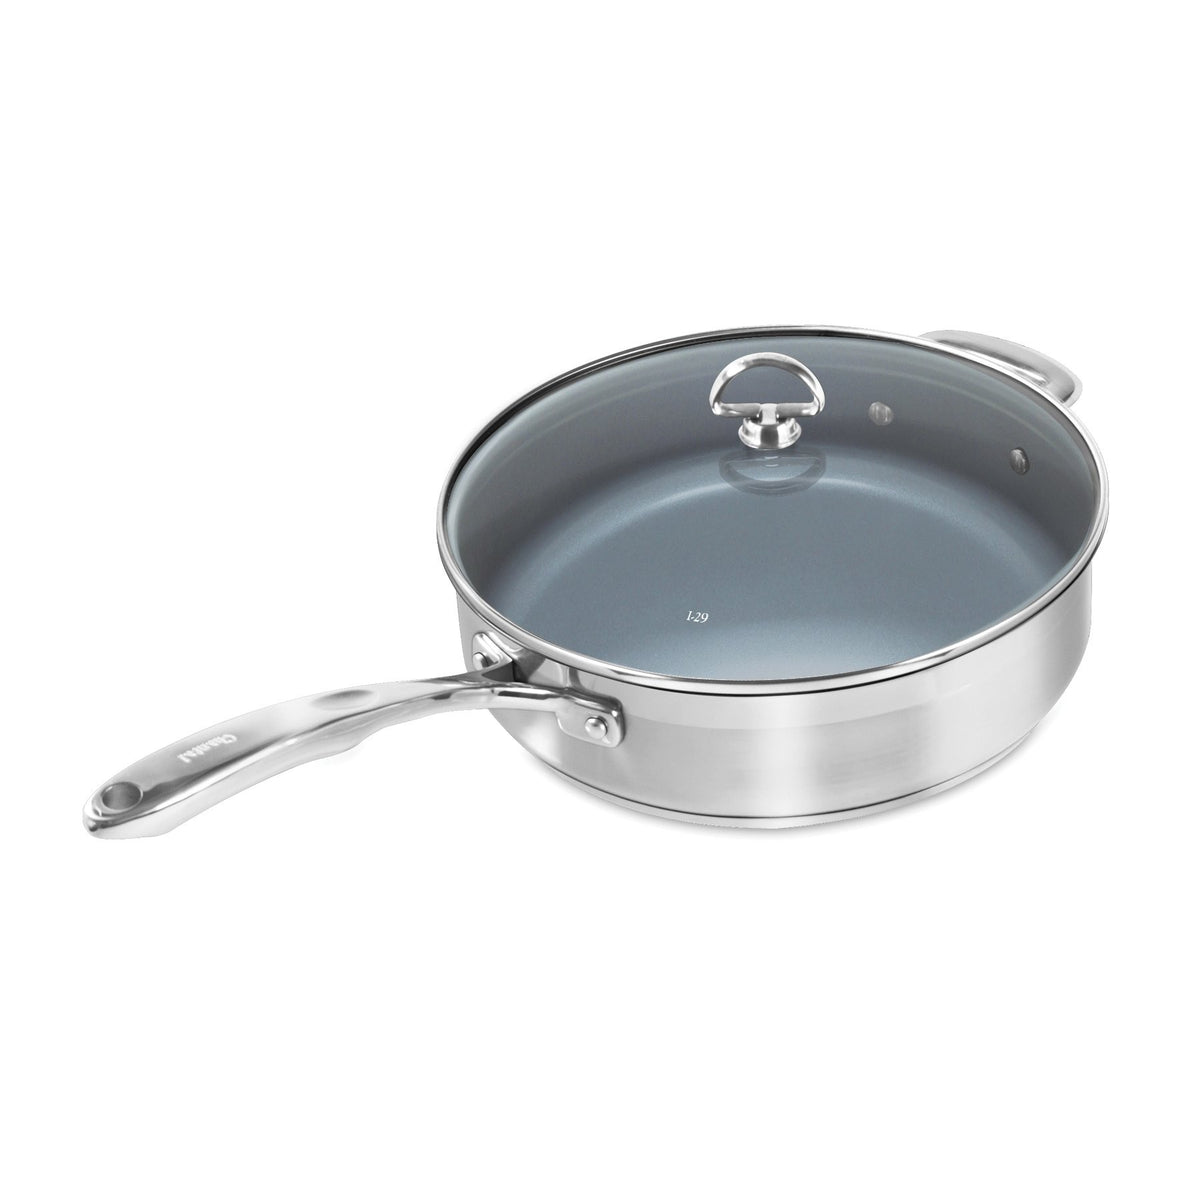 Chantal Cookware: A Detailed Review